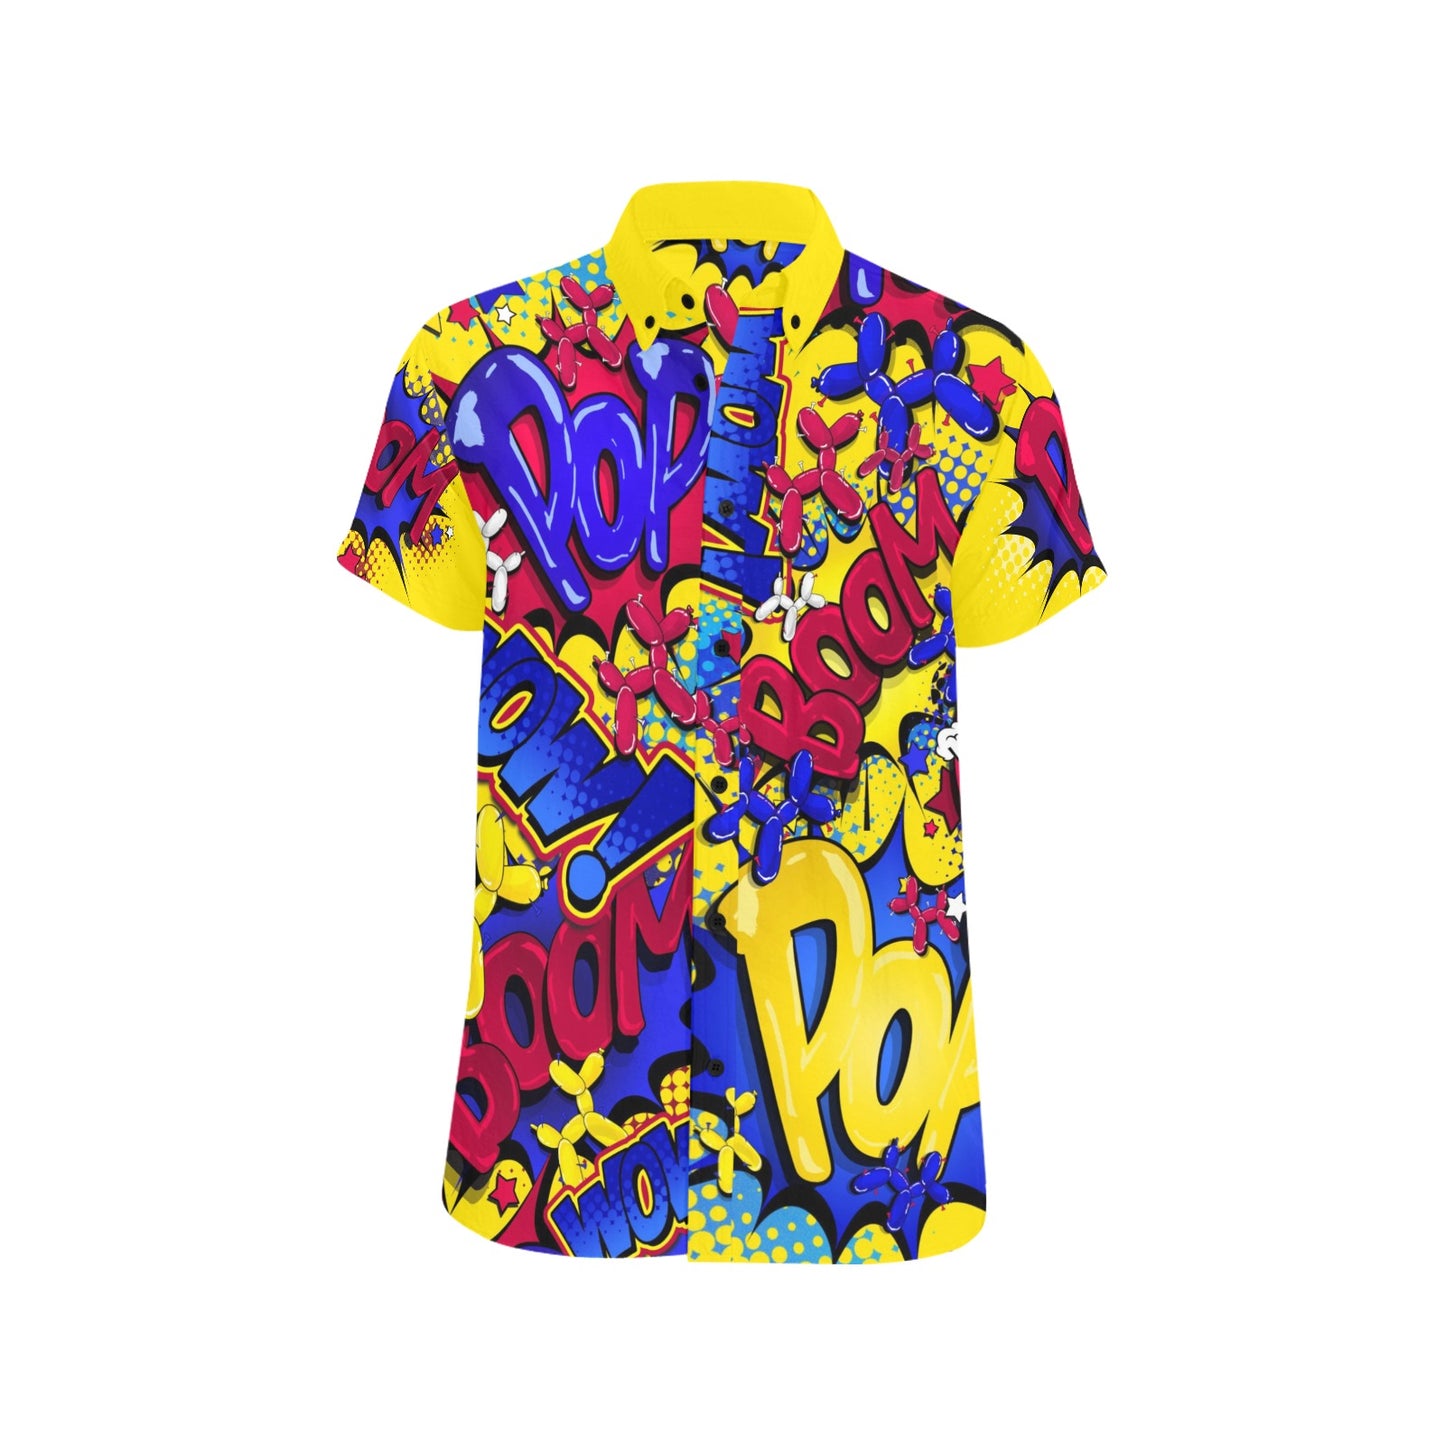 Balloon Dog shirt red, yellow and blue